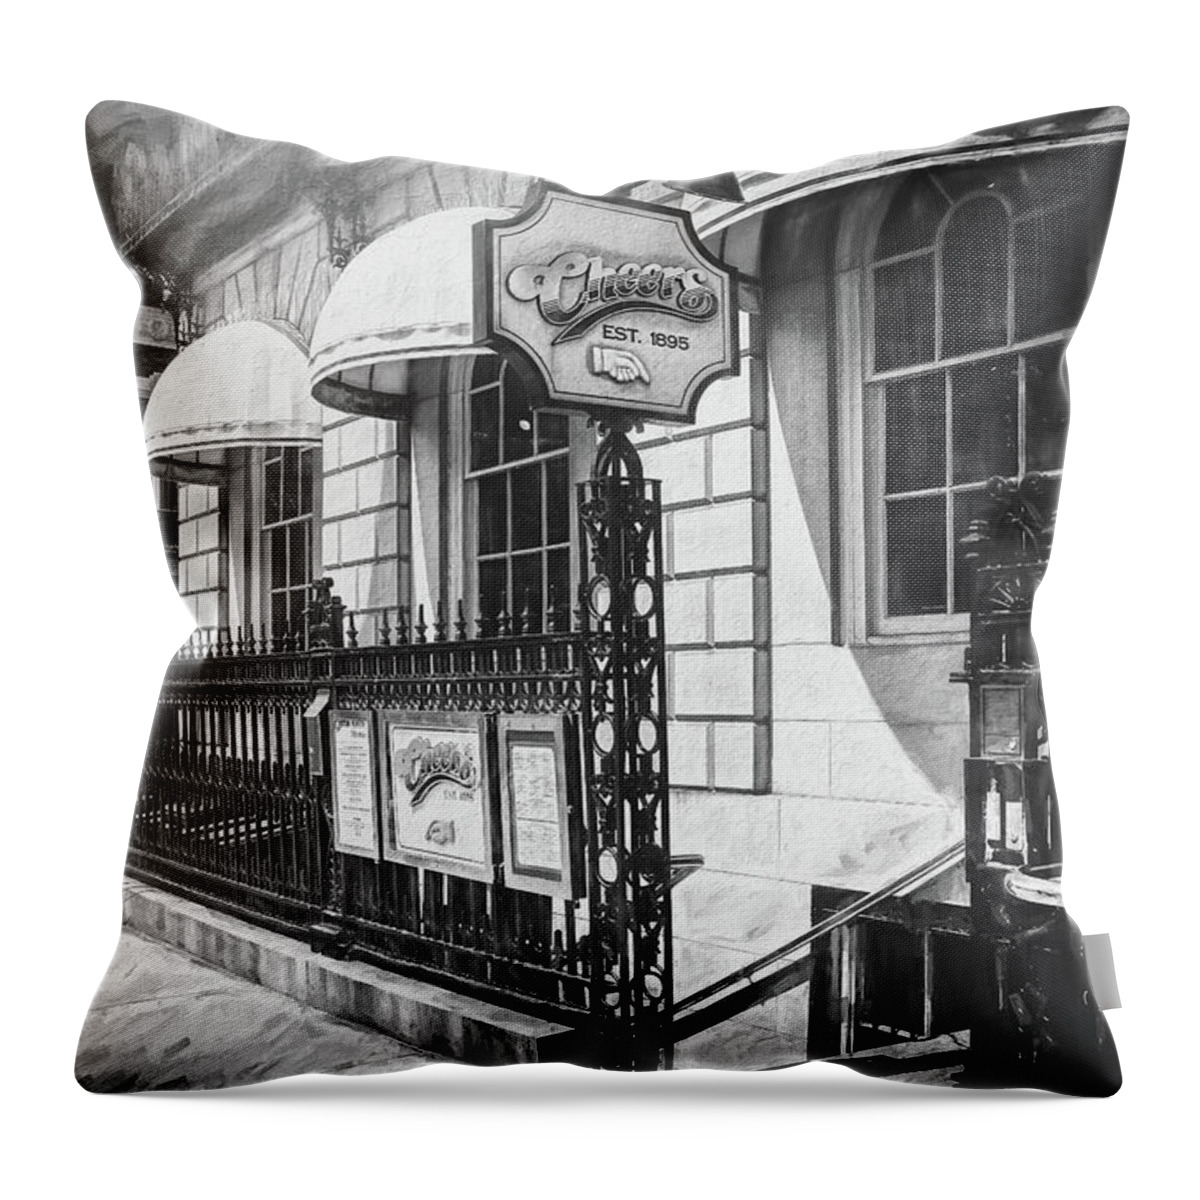 Boston Throw Pillow featuring the photograph Cheers Bar Beacon Hill Boston Black and White by Carol Japp